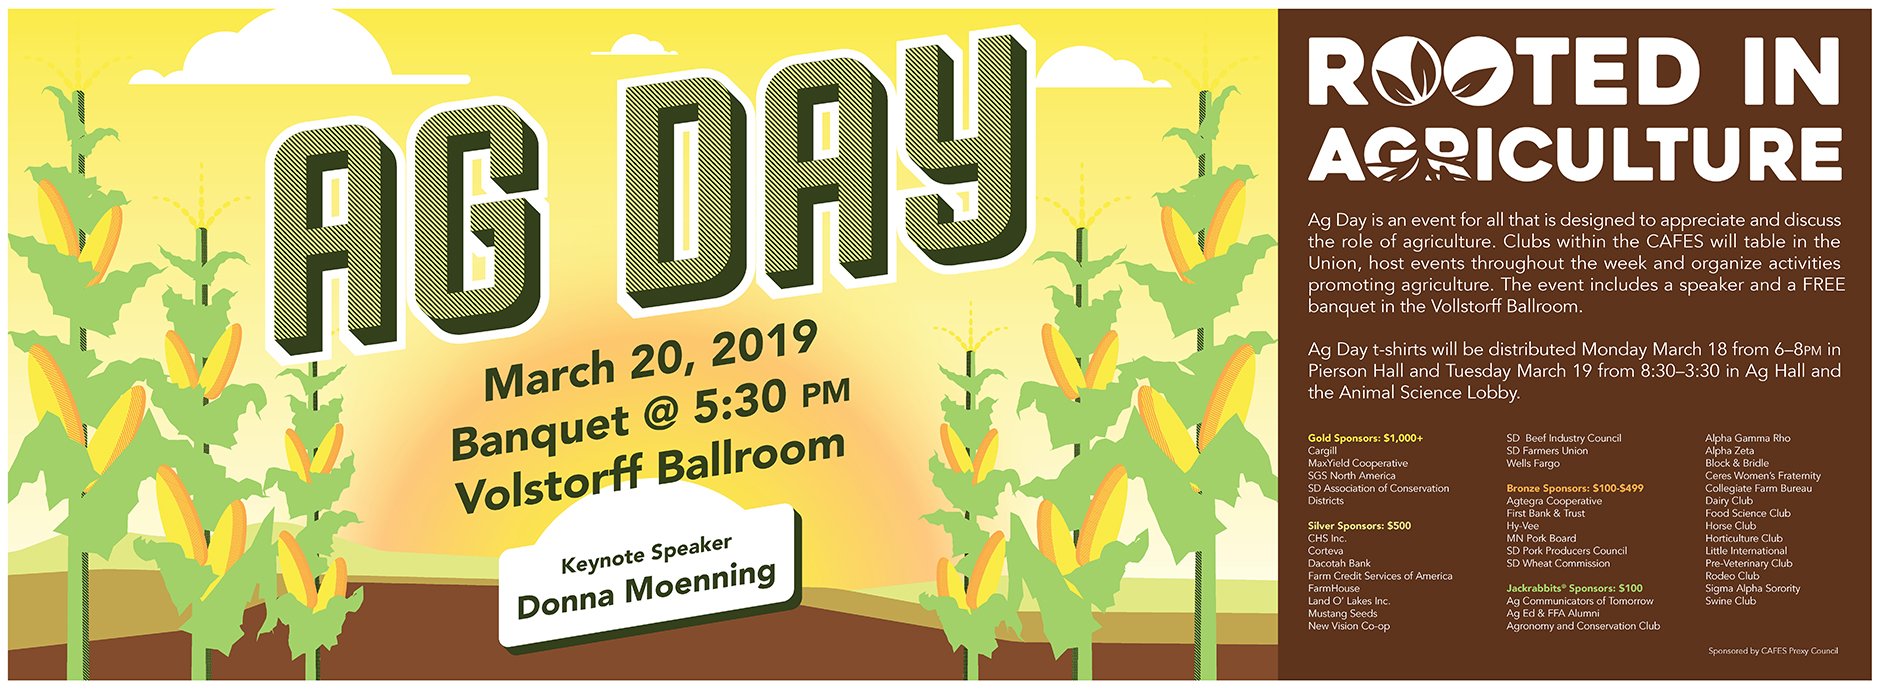 Ag Day promotional interior banner